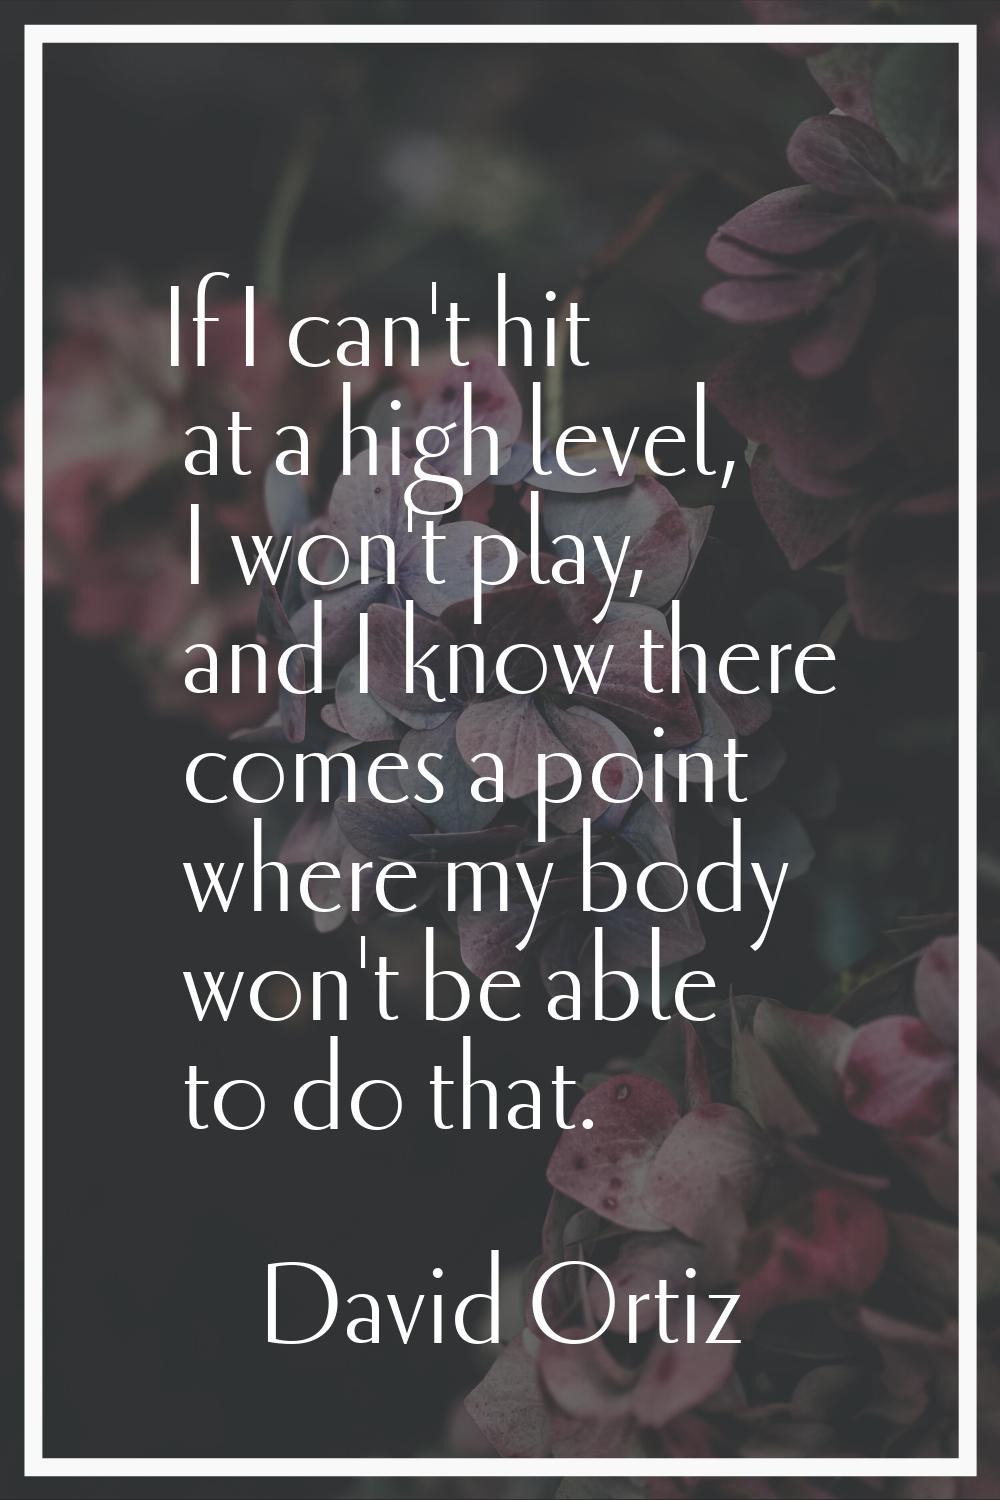 If I can't hit at a high level, I won't play, and I know there comes a point where my body won't be